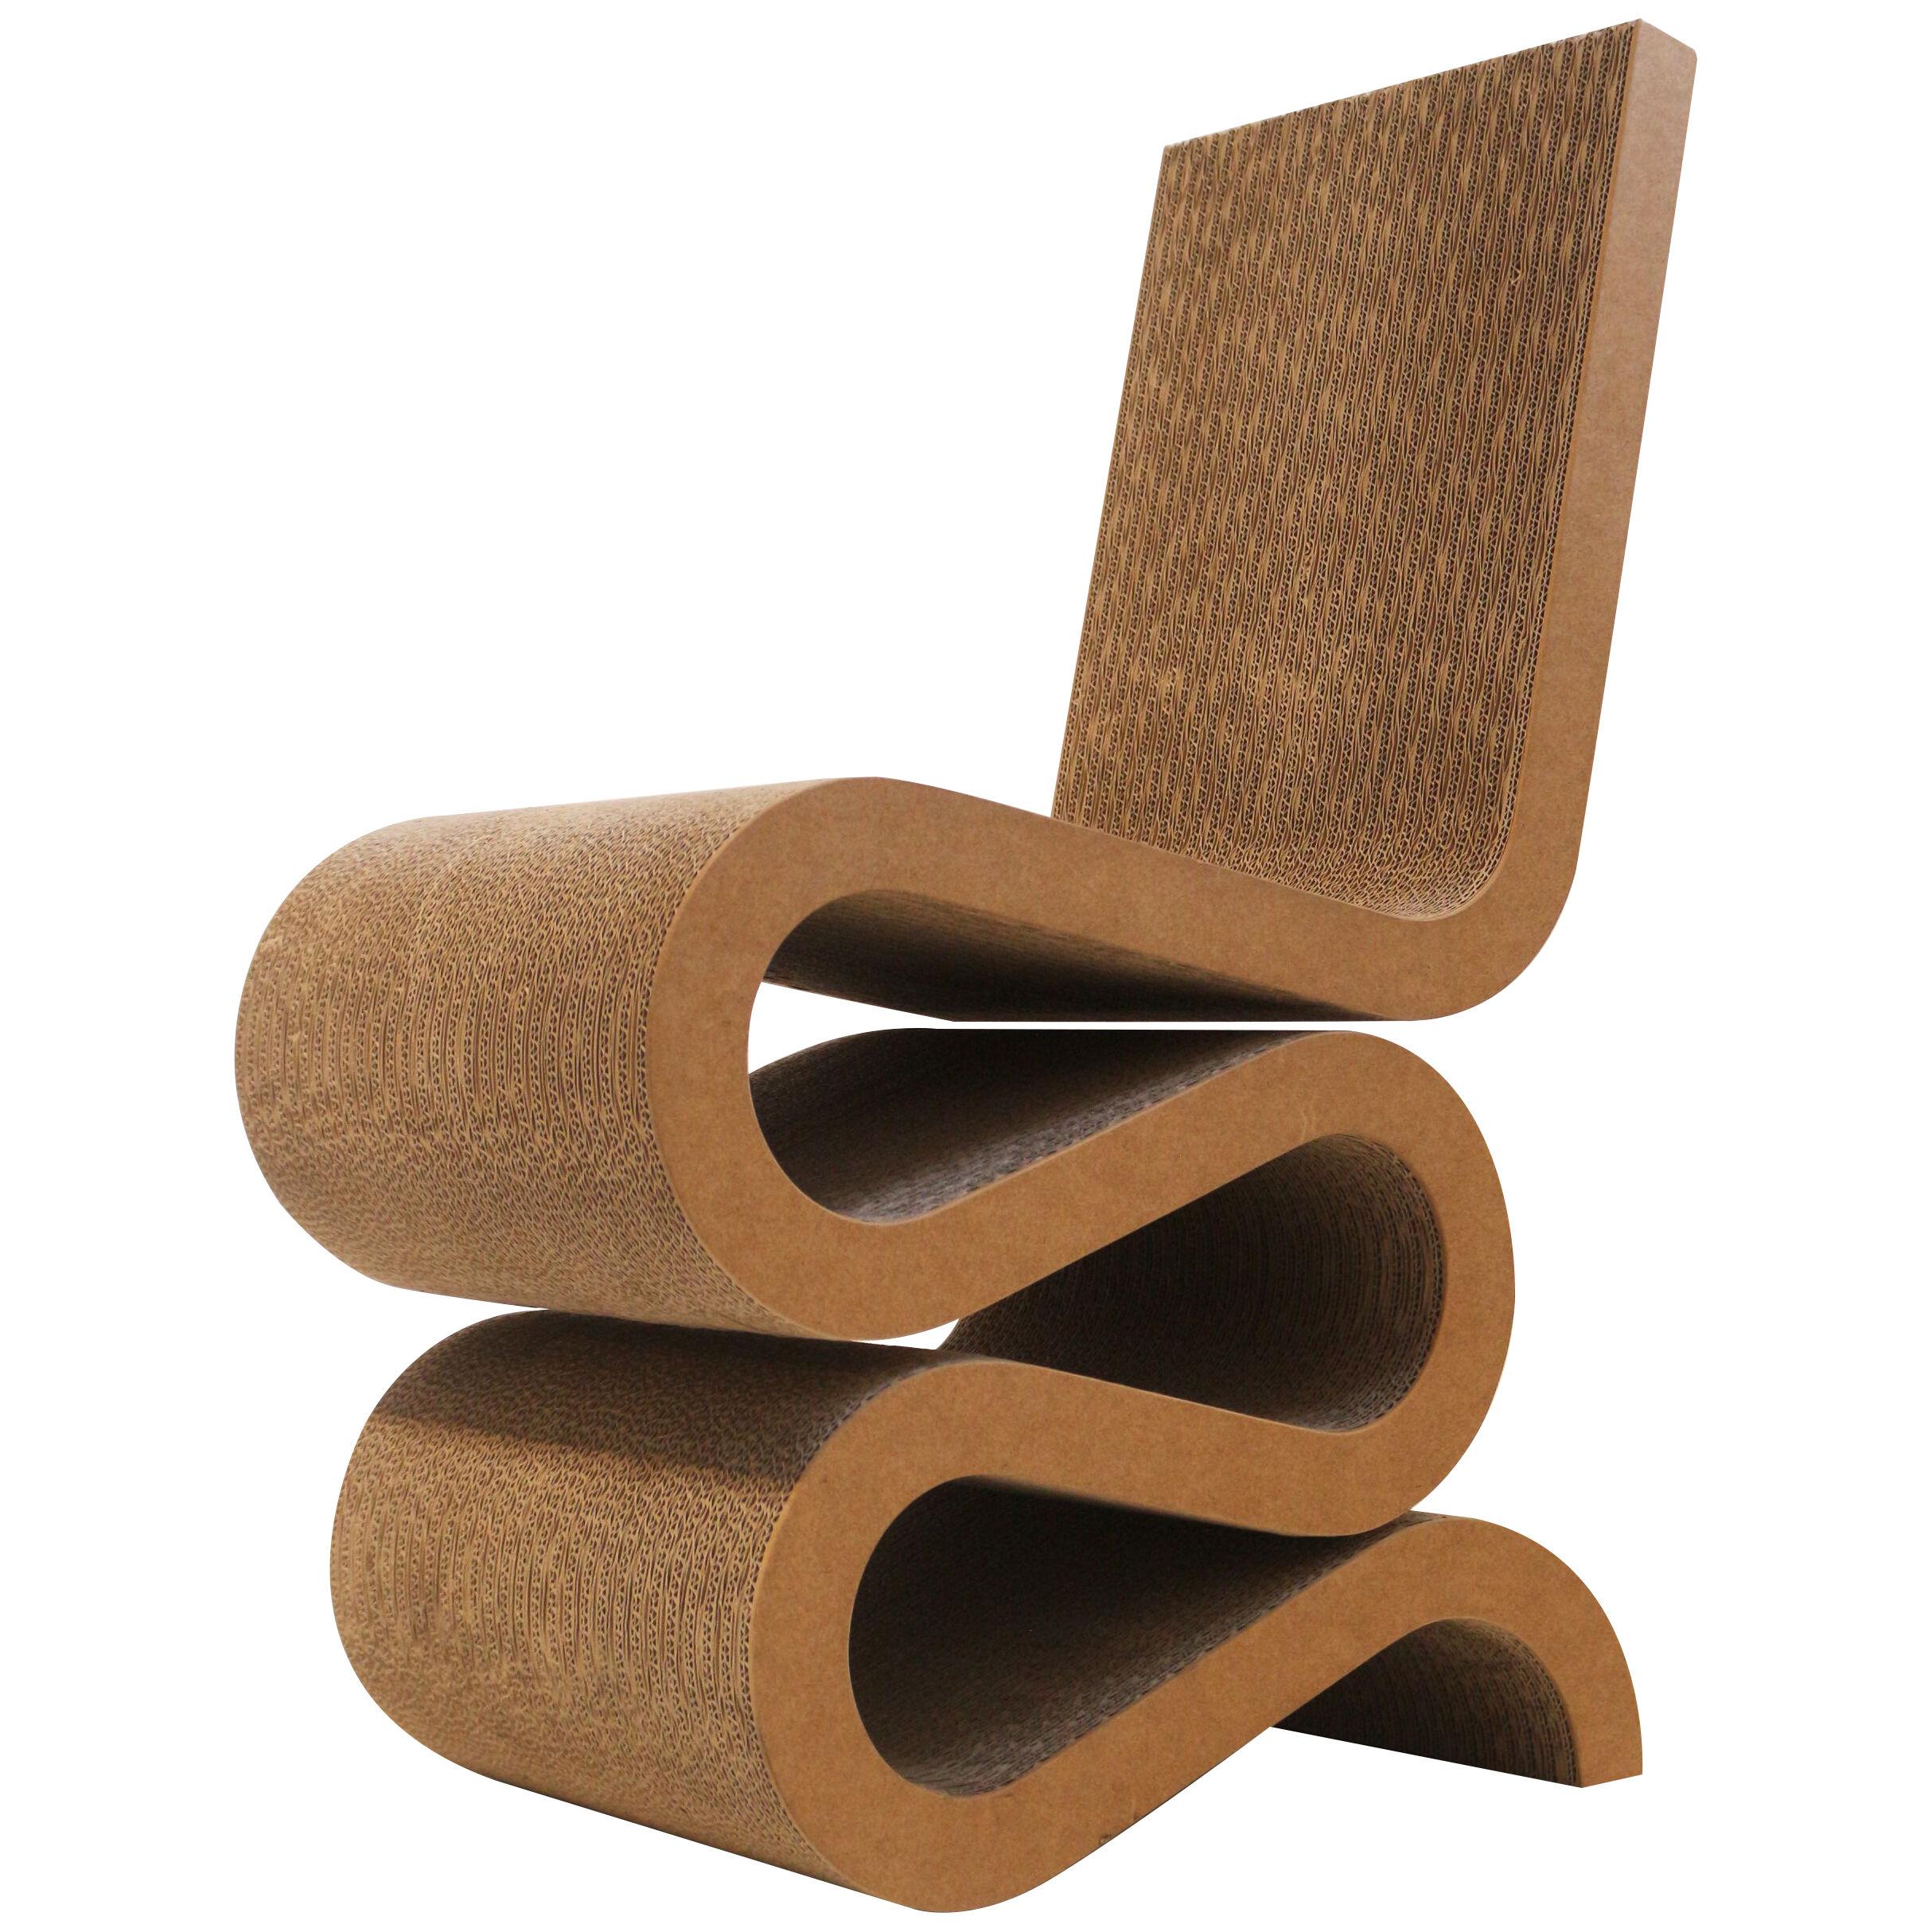 Frank Gehry chair